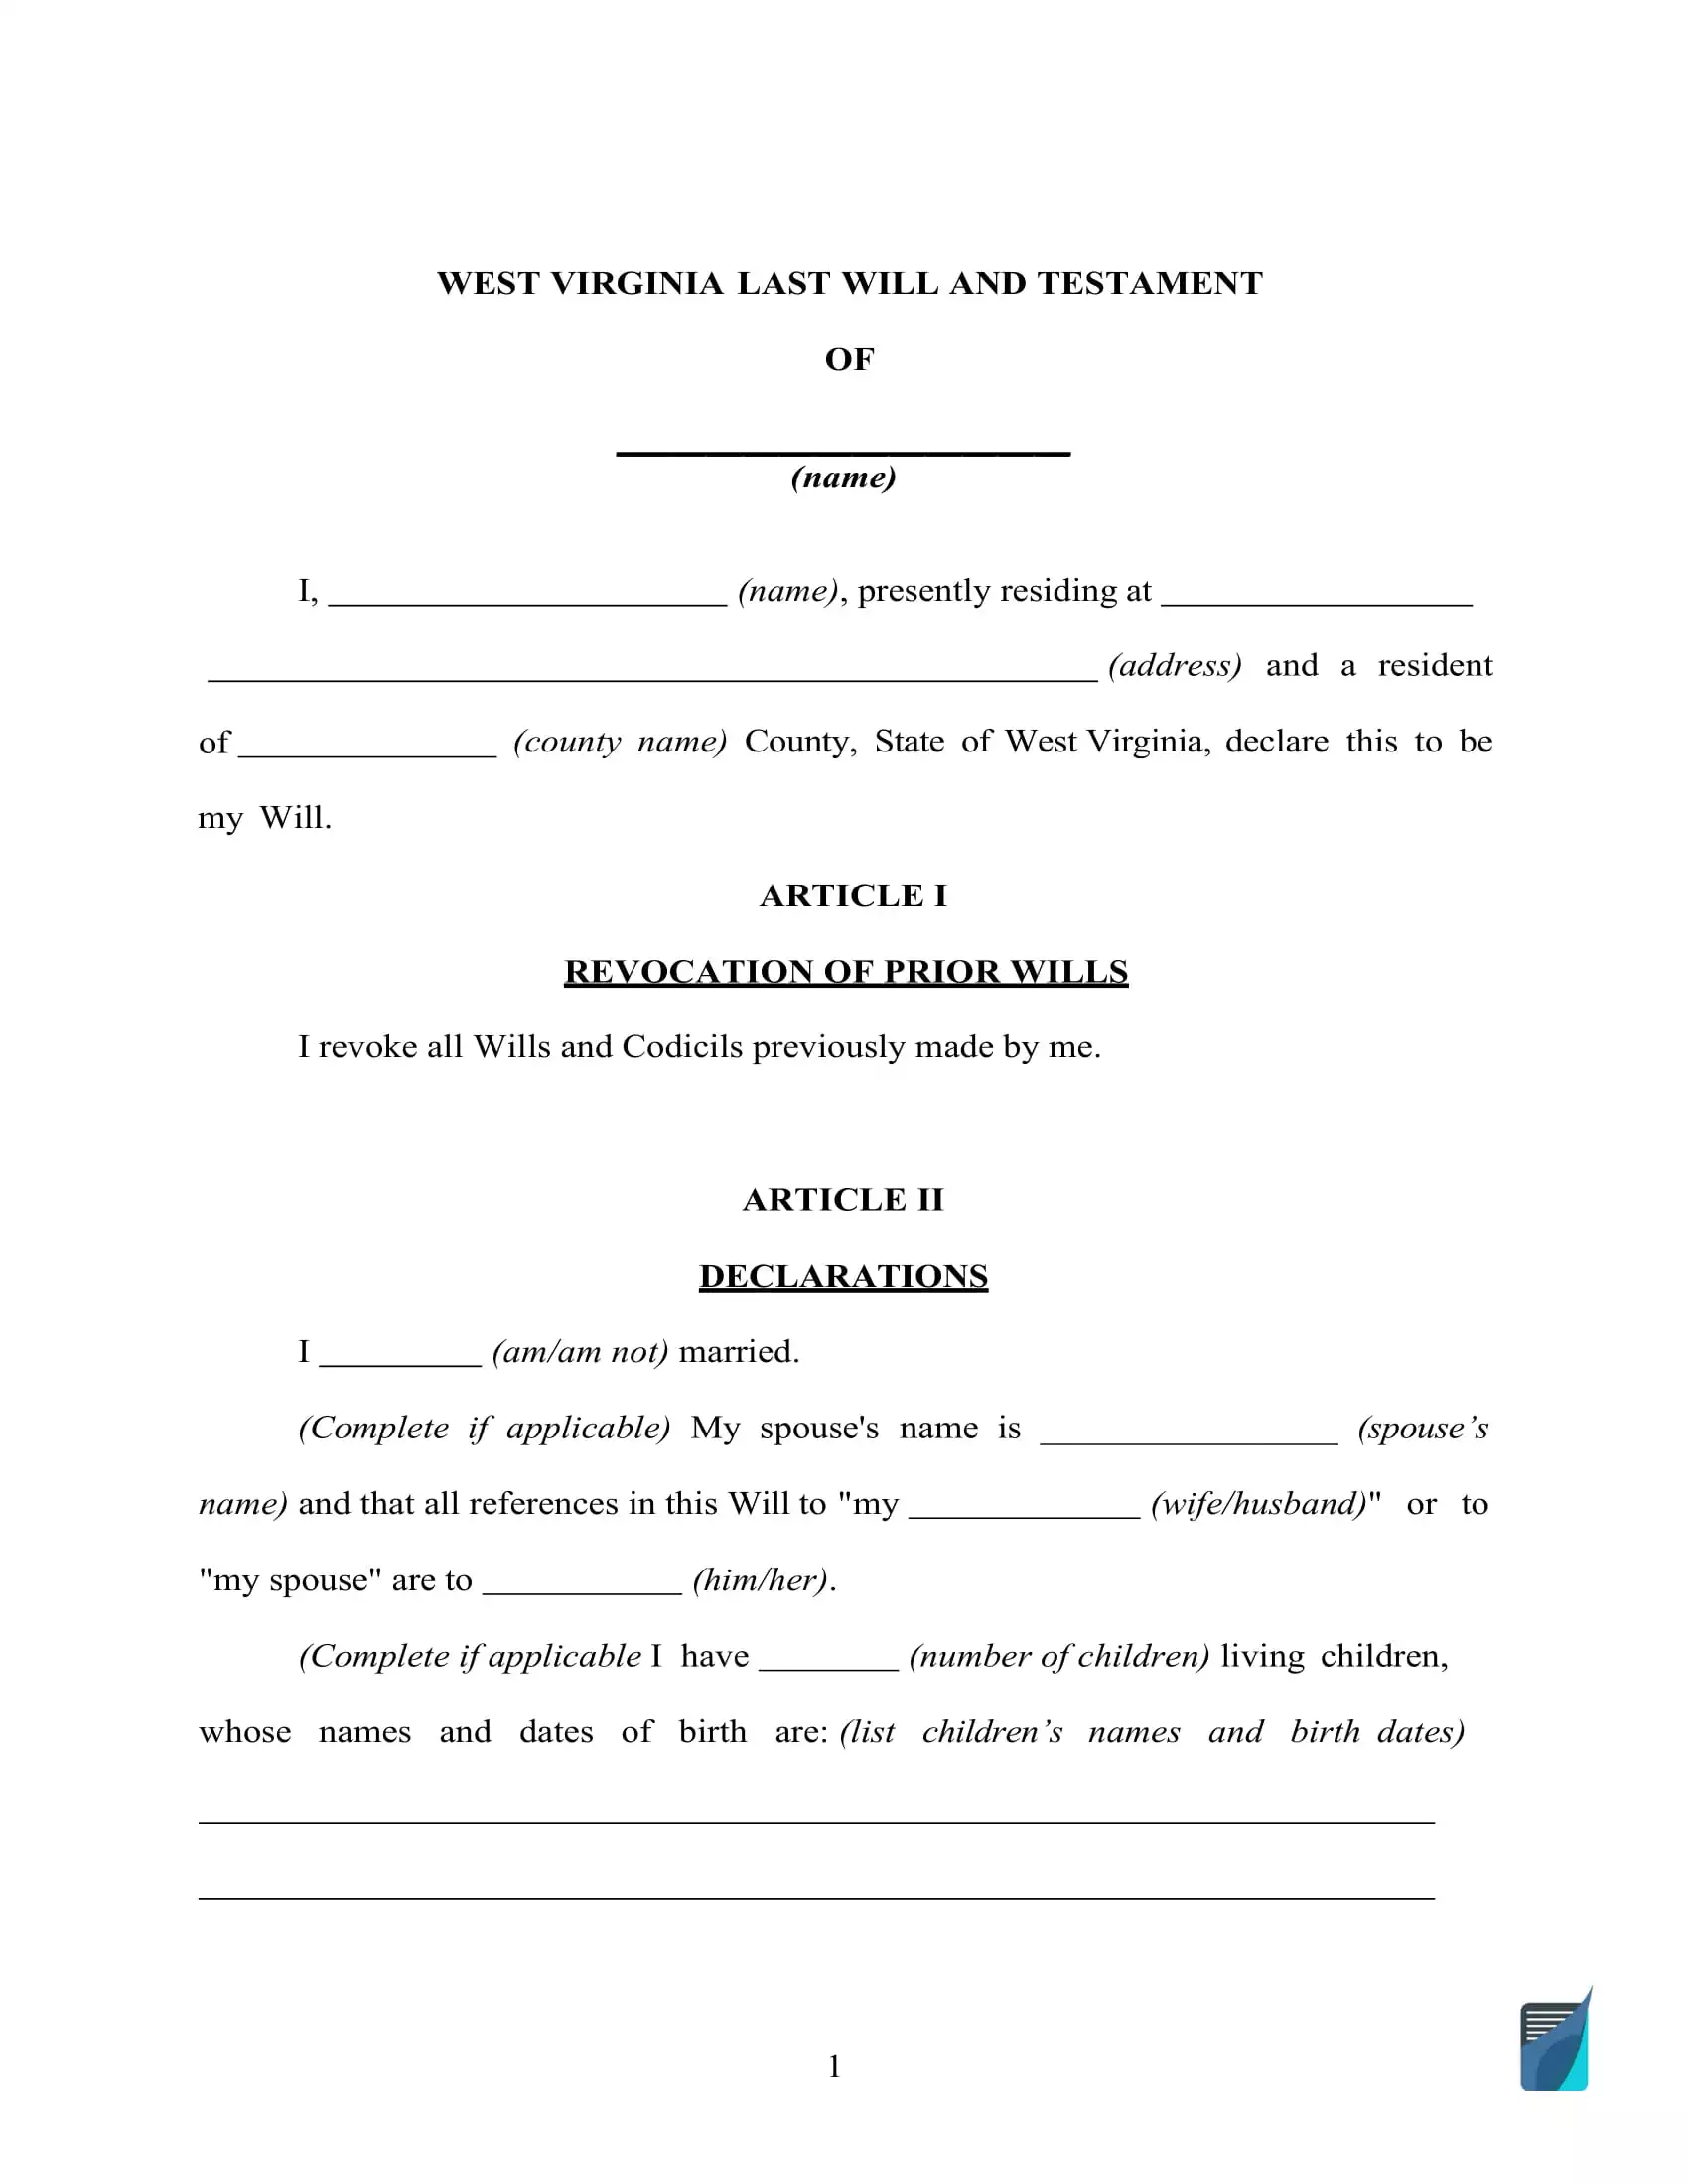 west-virginia-last-will-and-testament-template